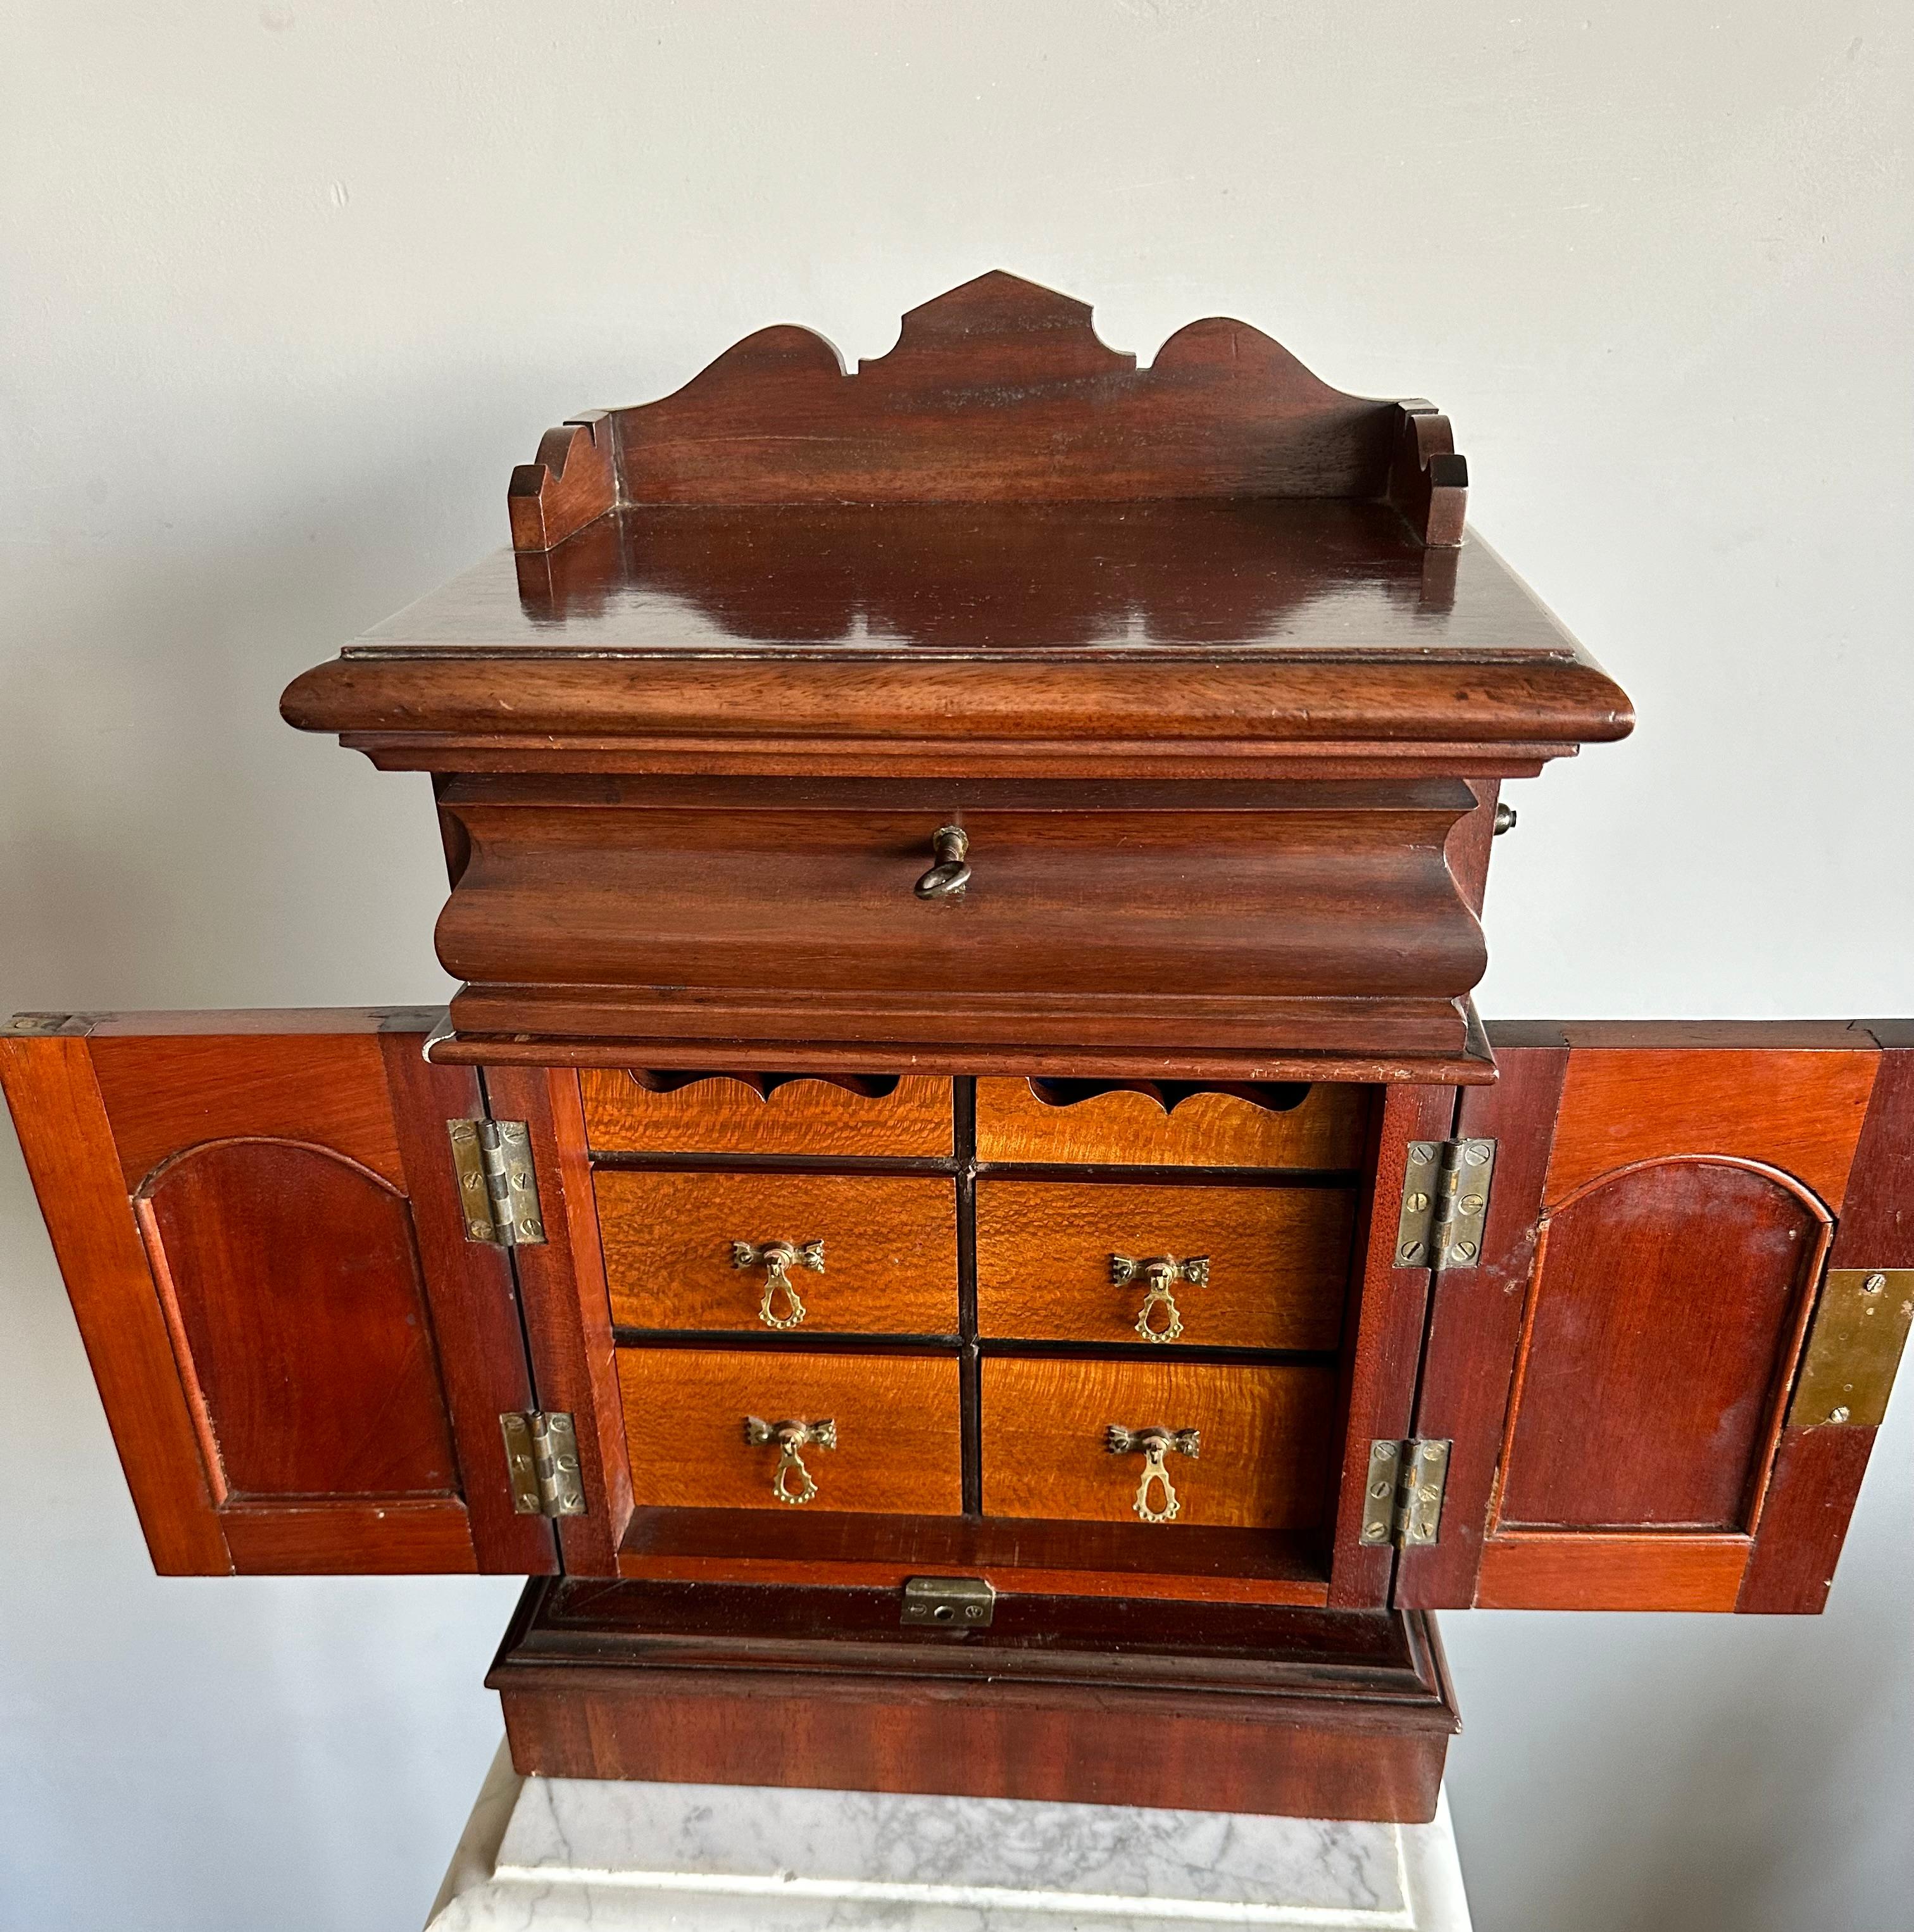 British Top Quality 19th Century Jewelry, Treasure Box, Cabinet w Drawers & Mirror Doors For Sale